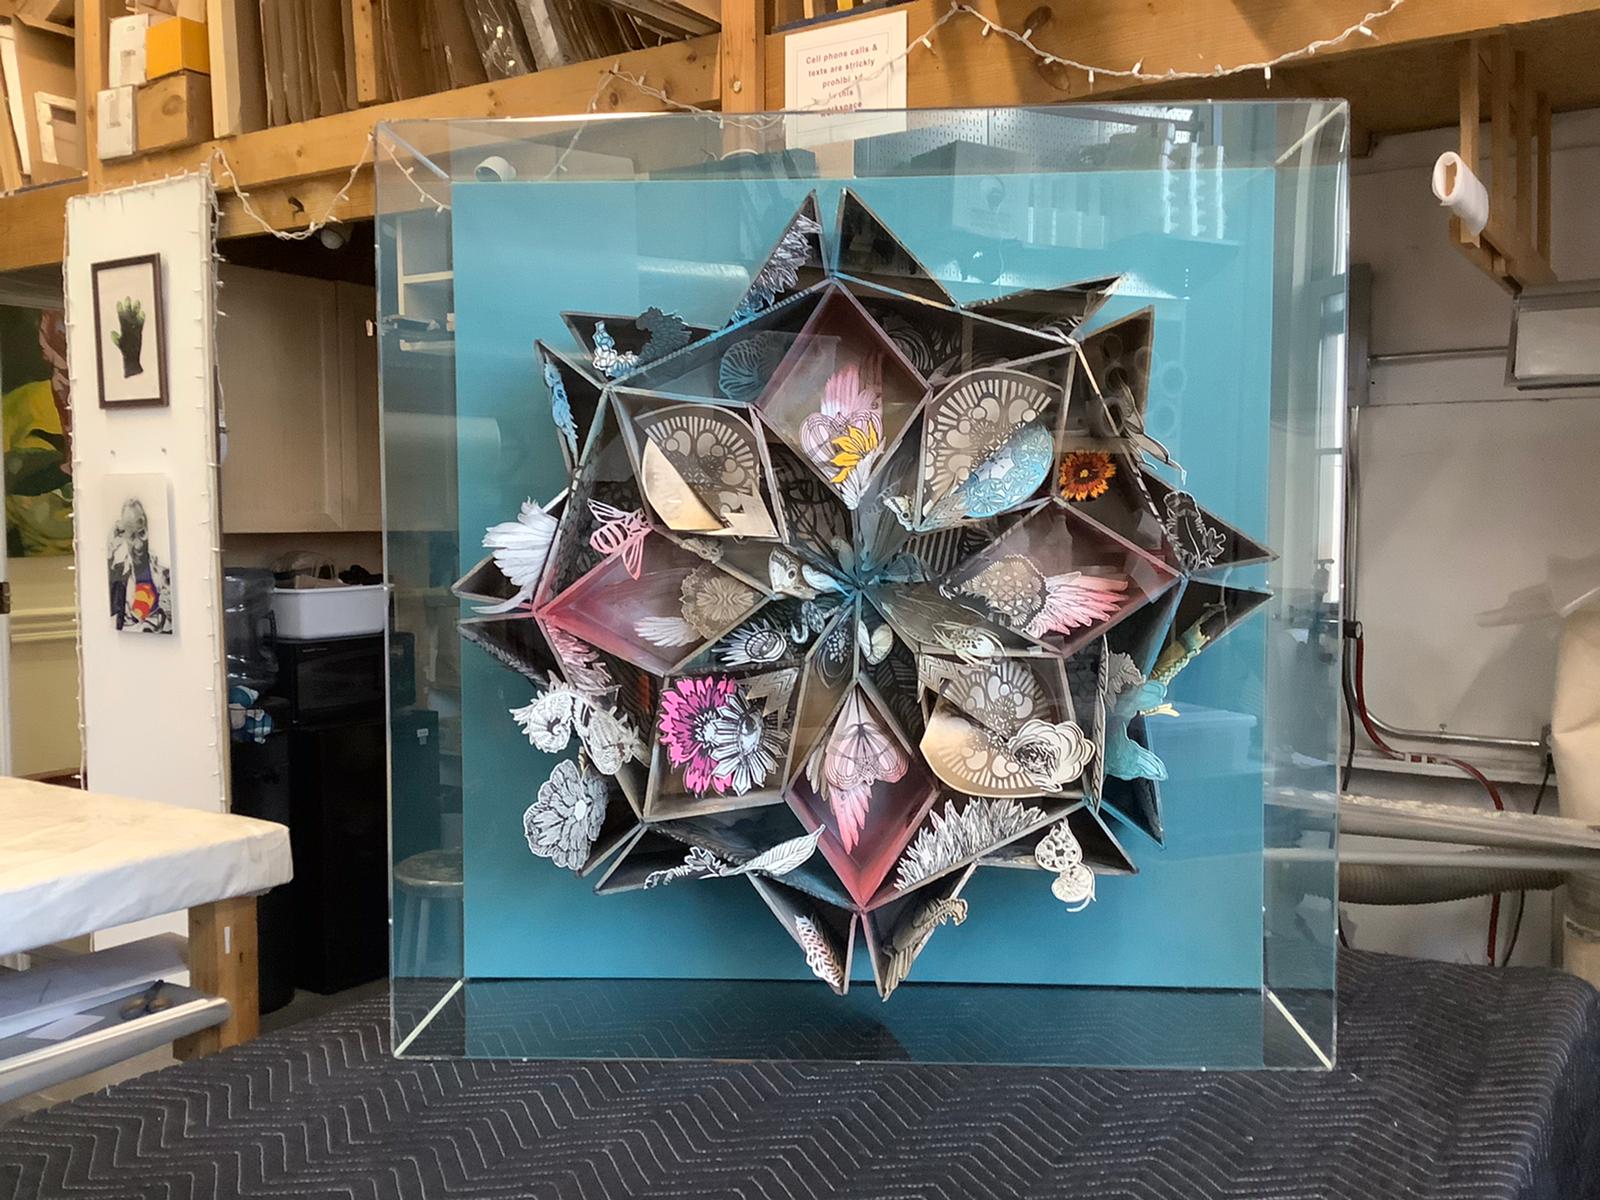 Plexiglass Box for Displaying Swoon Artwork - Frames and Stretchers -  Custom Framing Shop in NYC